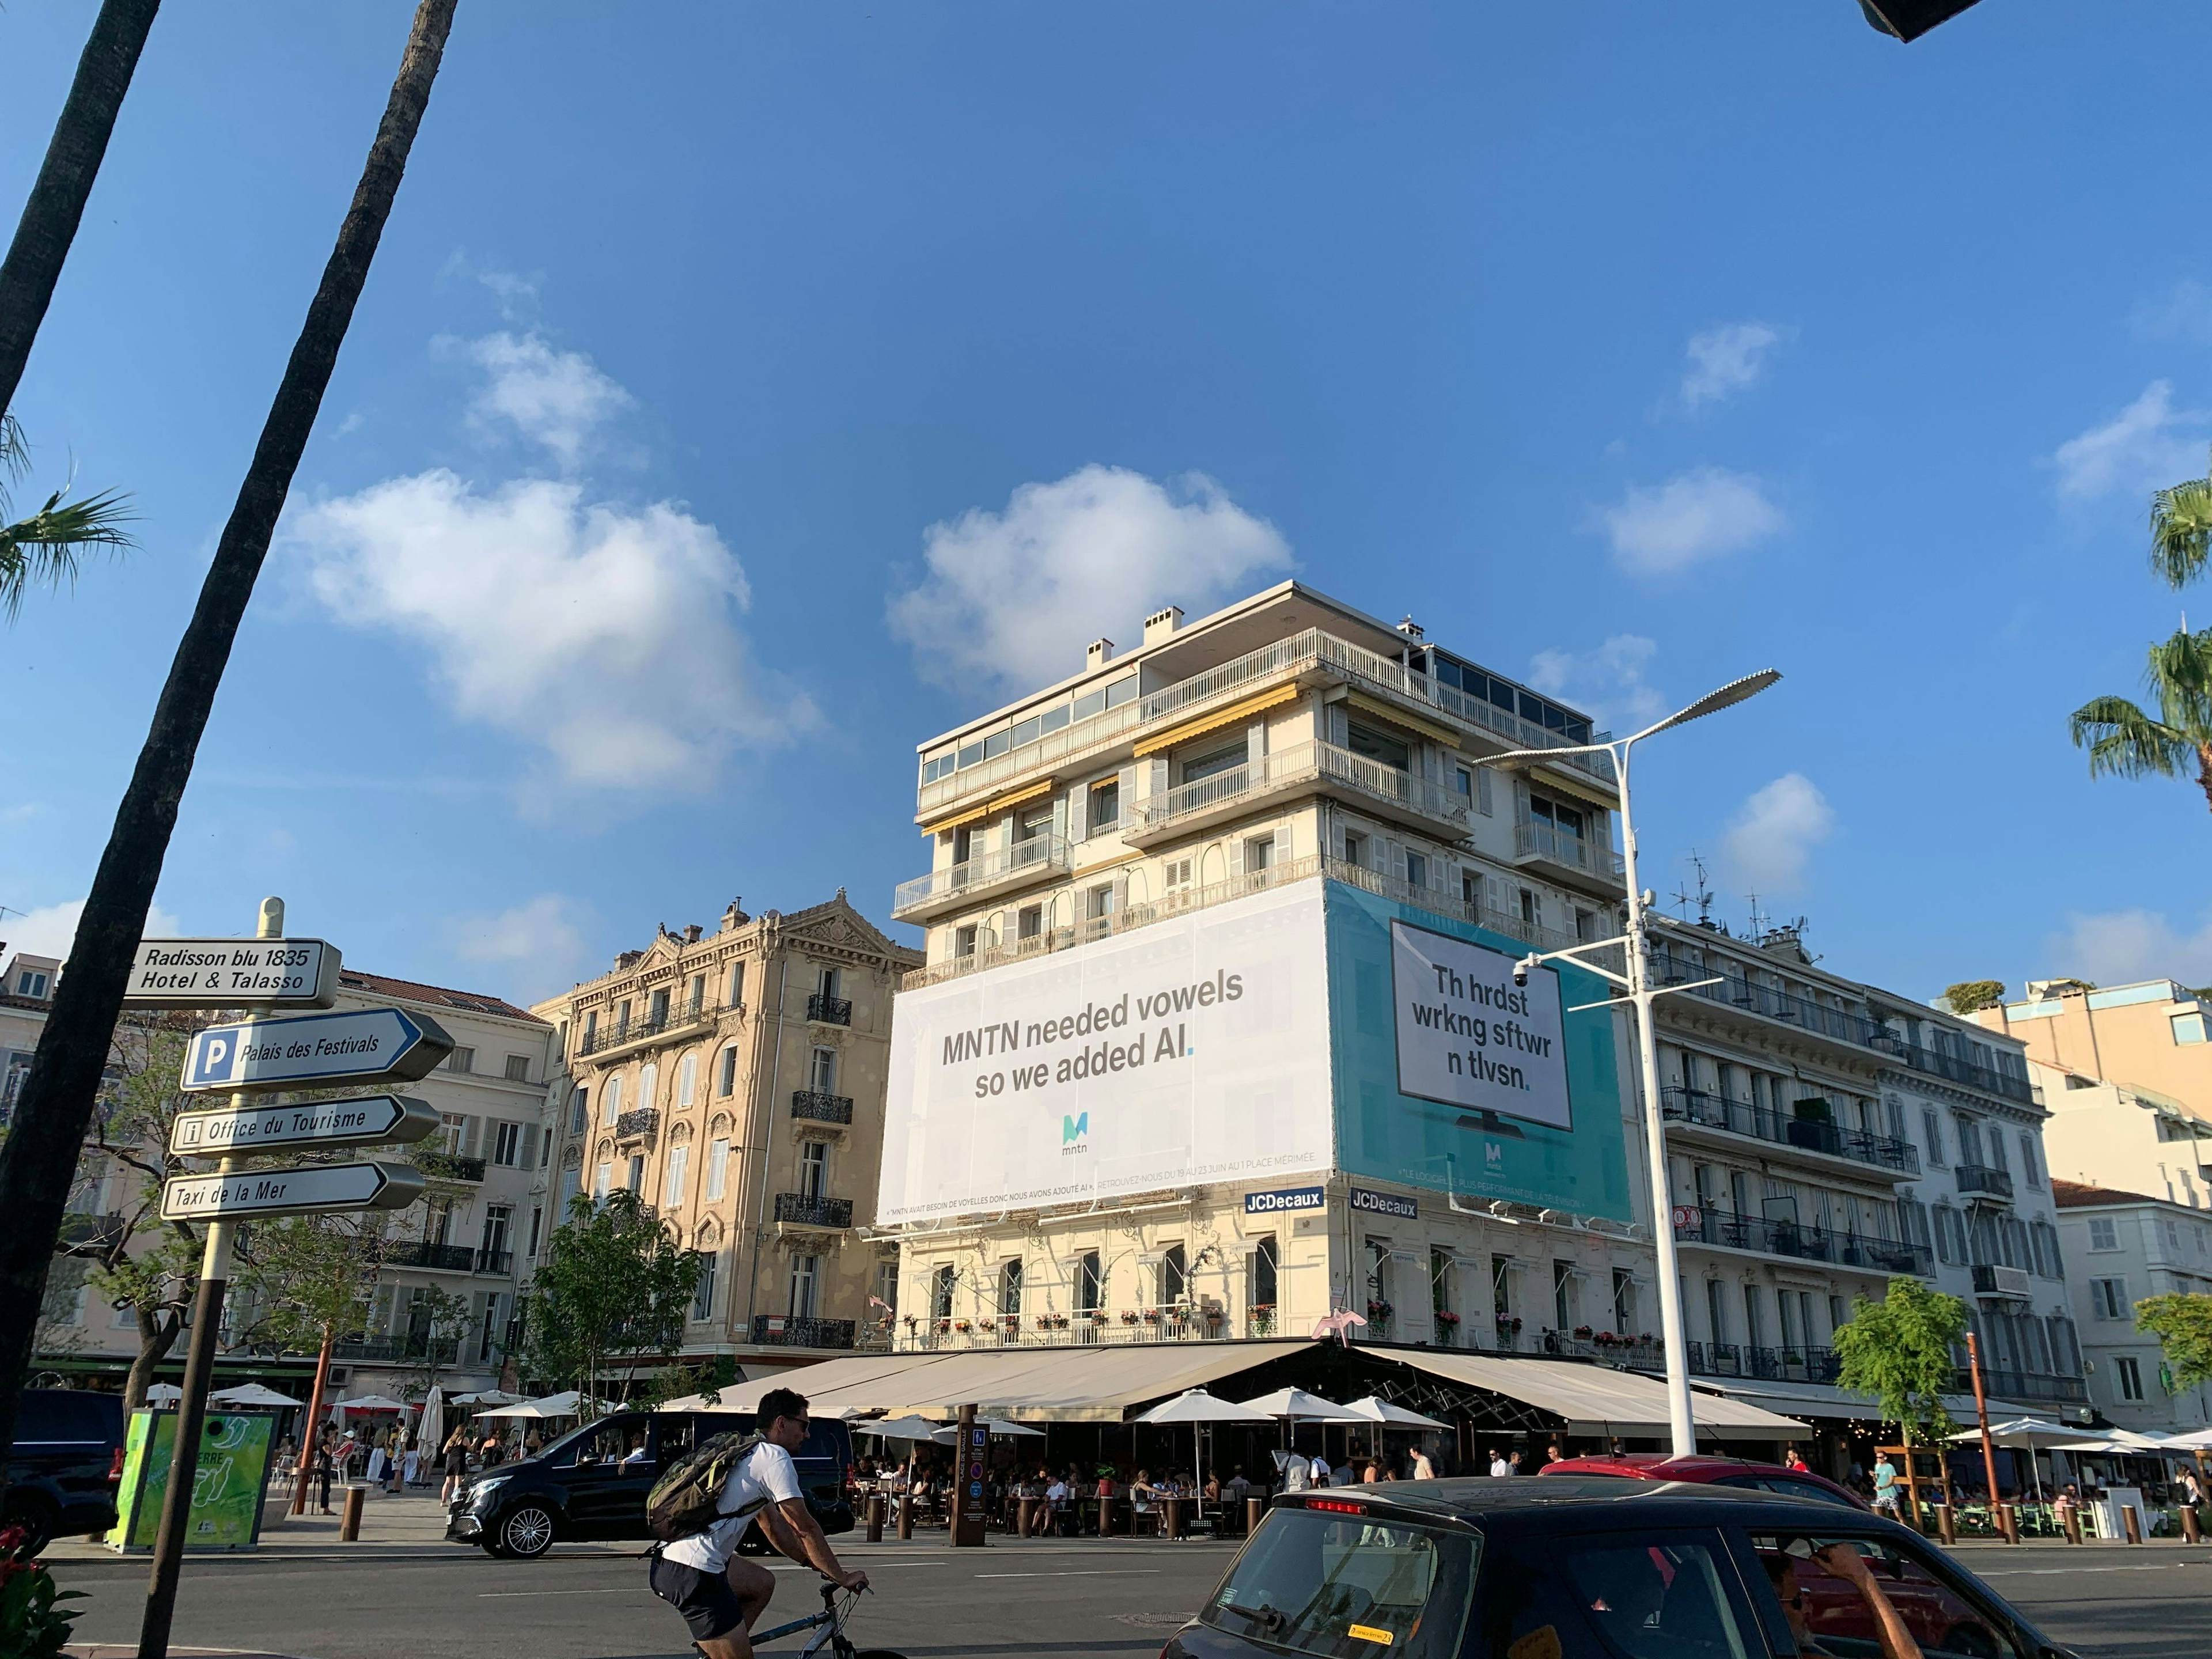 an image of a billboard on the side of a building reading "MNTN needed vowels so we added AI."